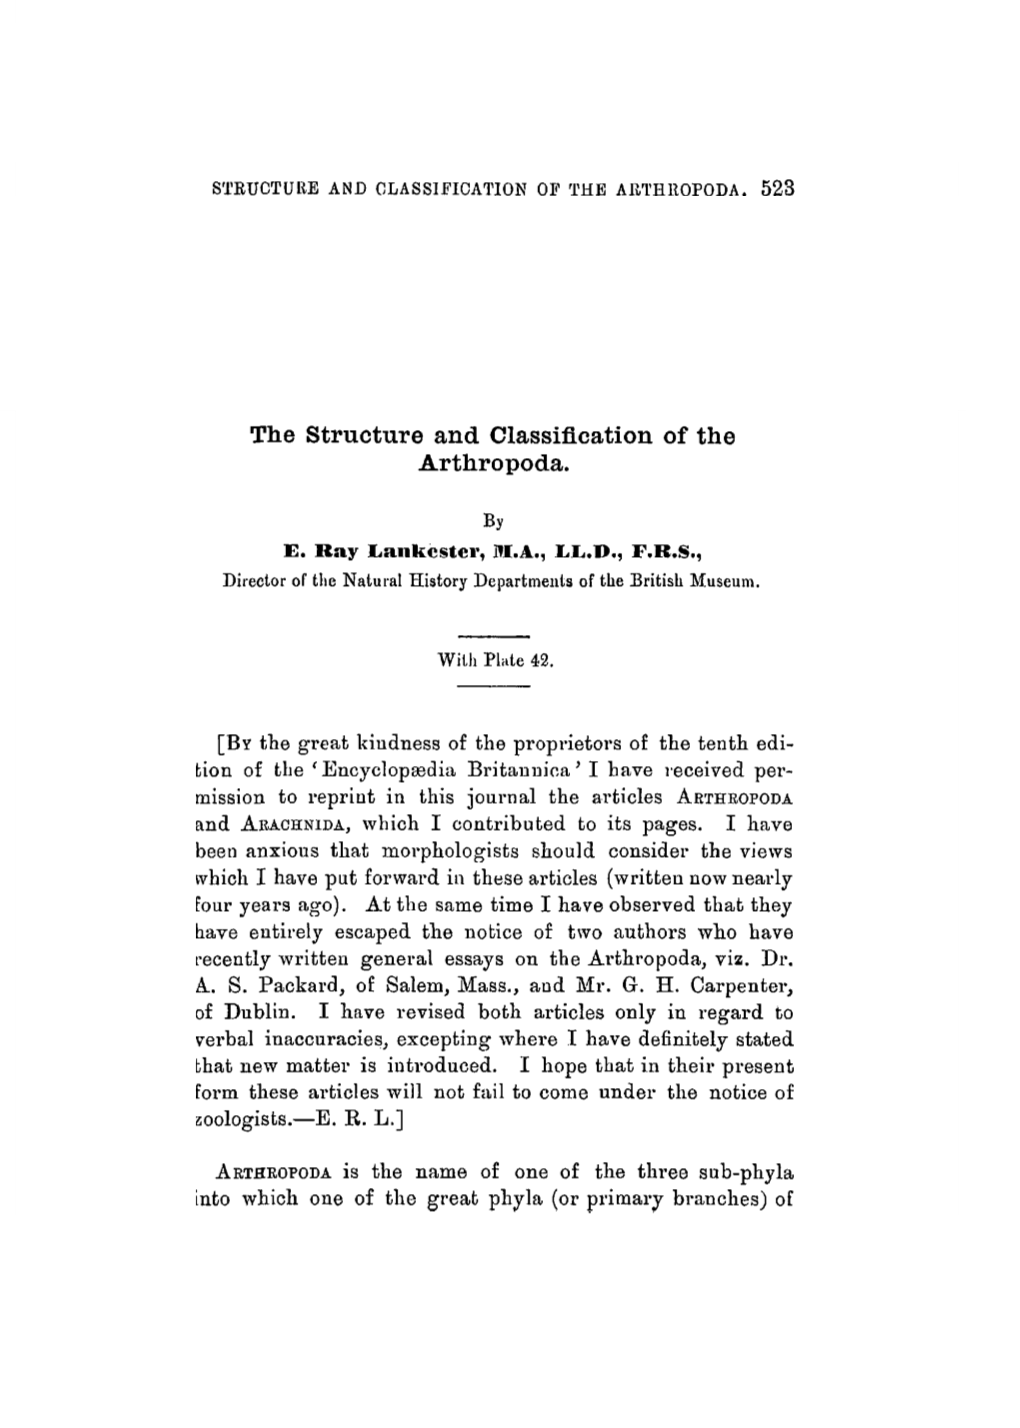 The Structure and Classification of the Arthropoda